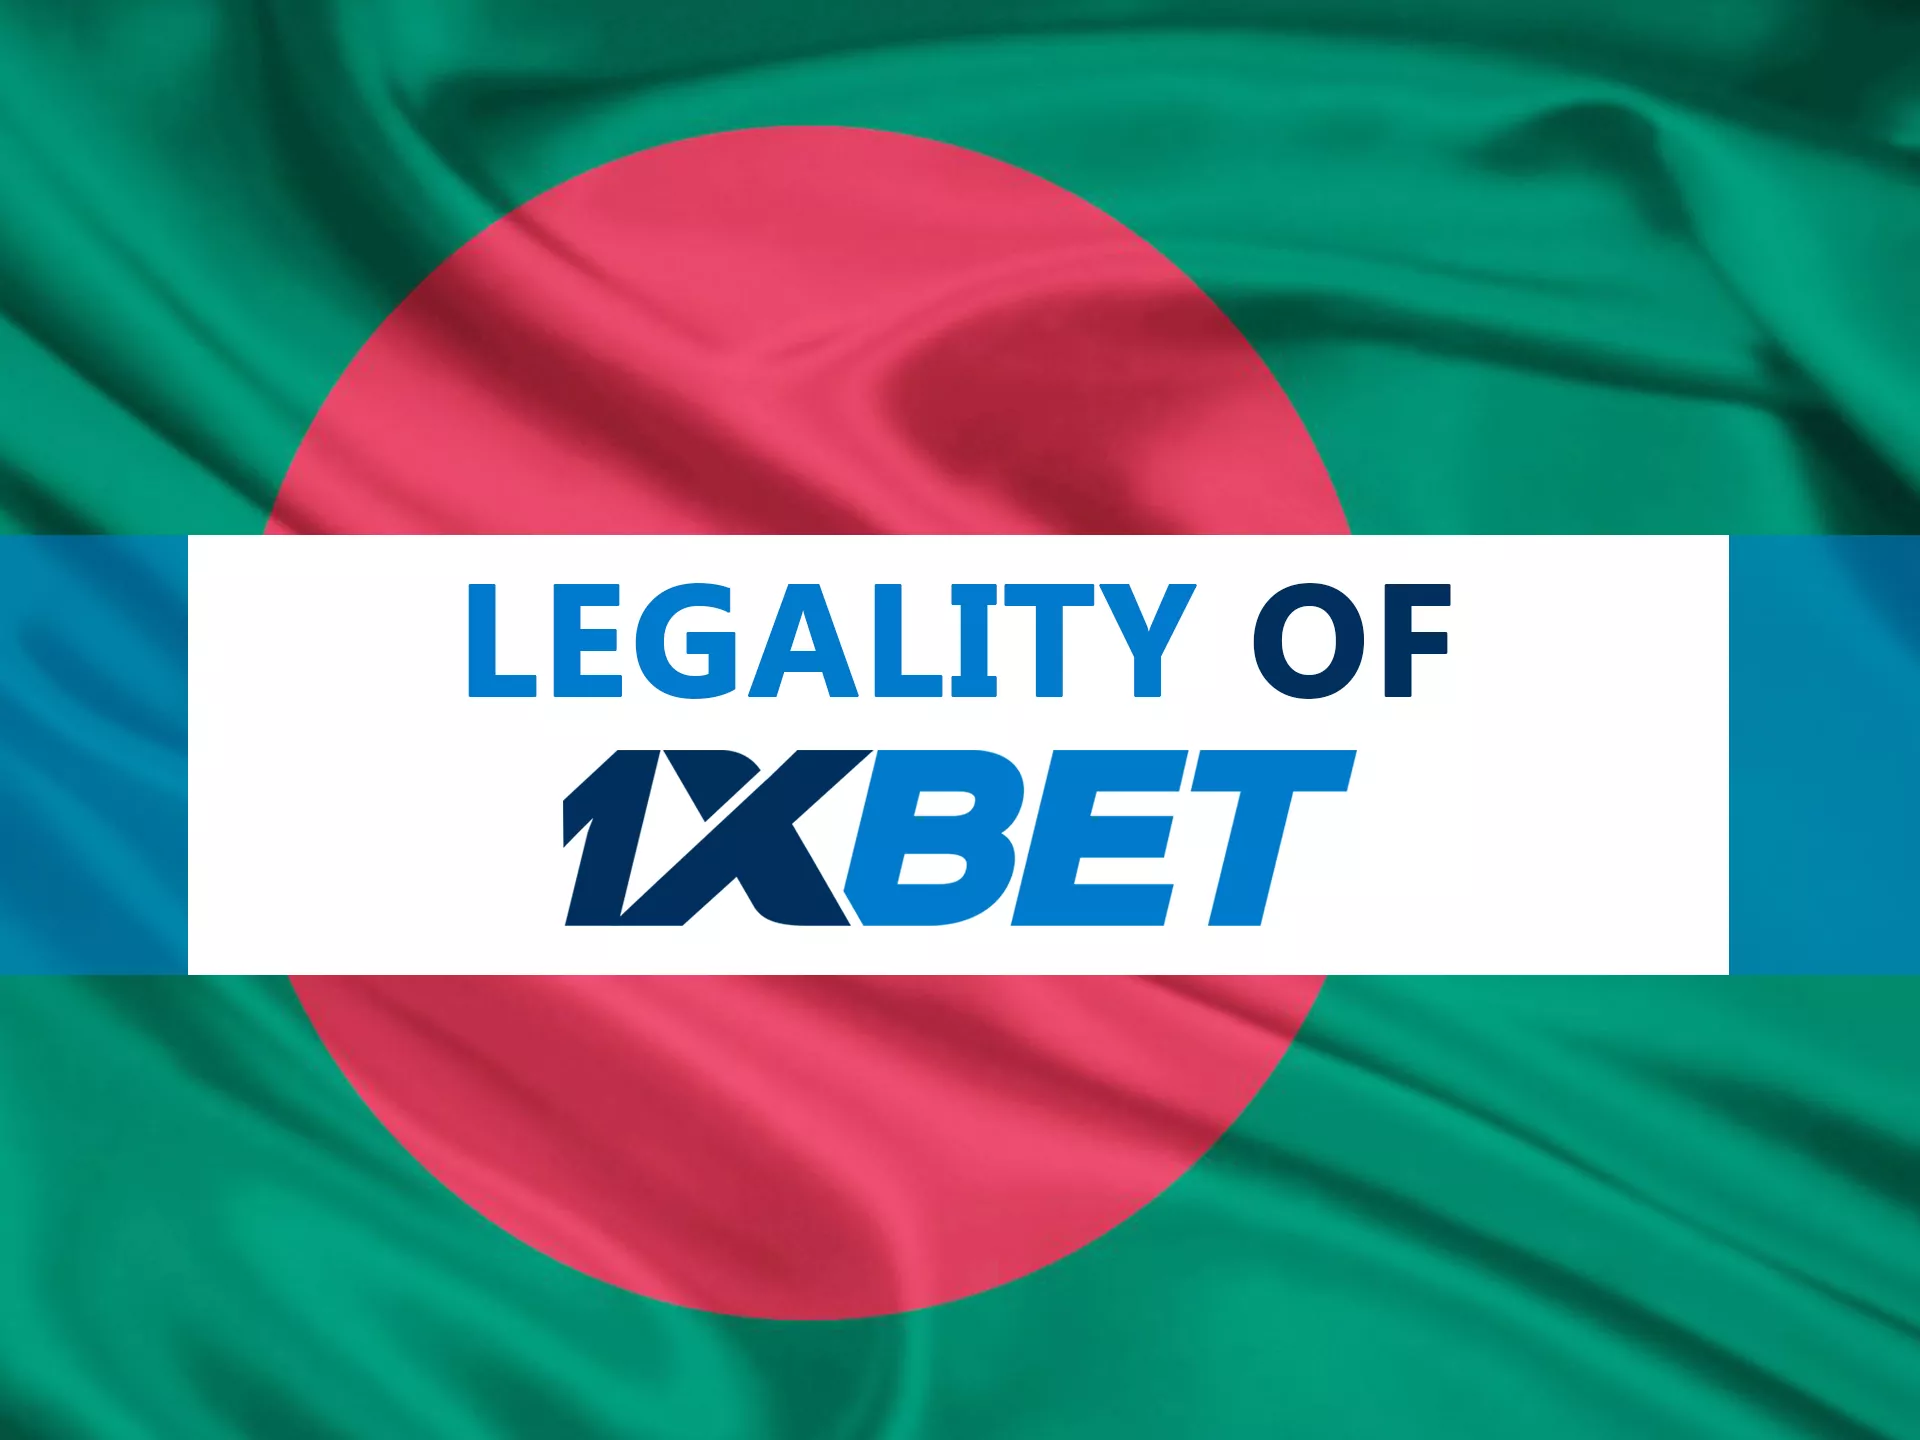 Only online betting is legal in Bangladesh.